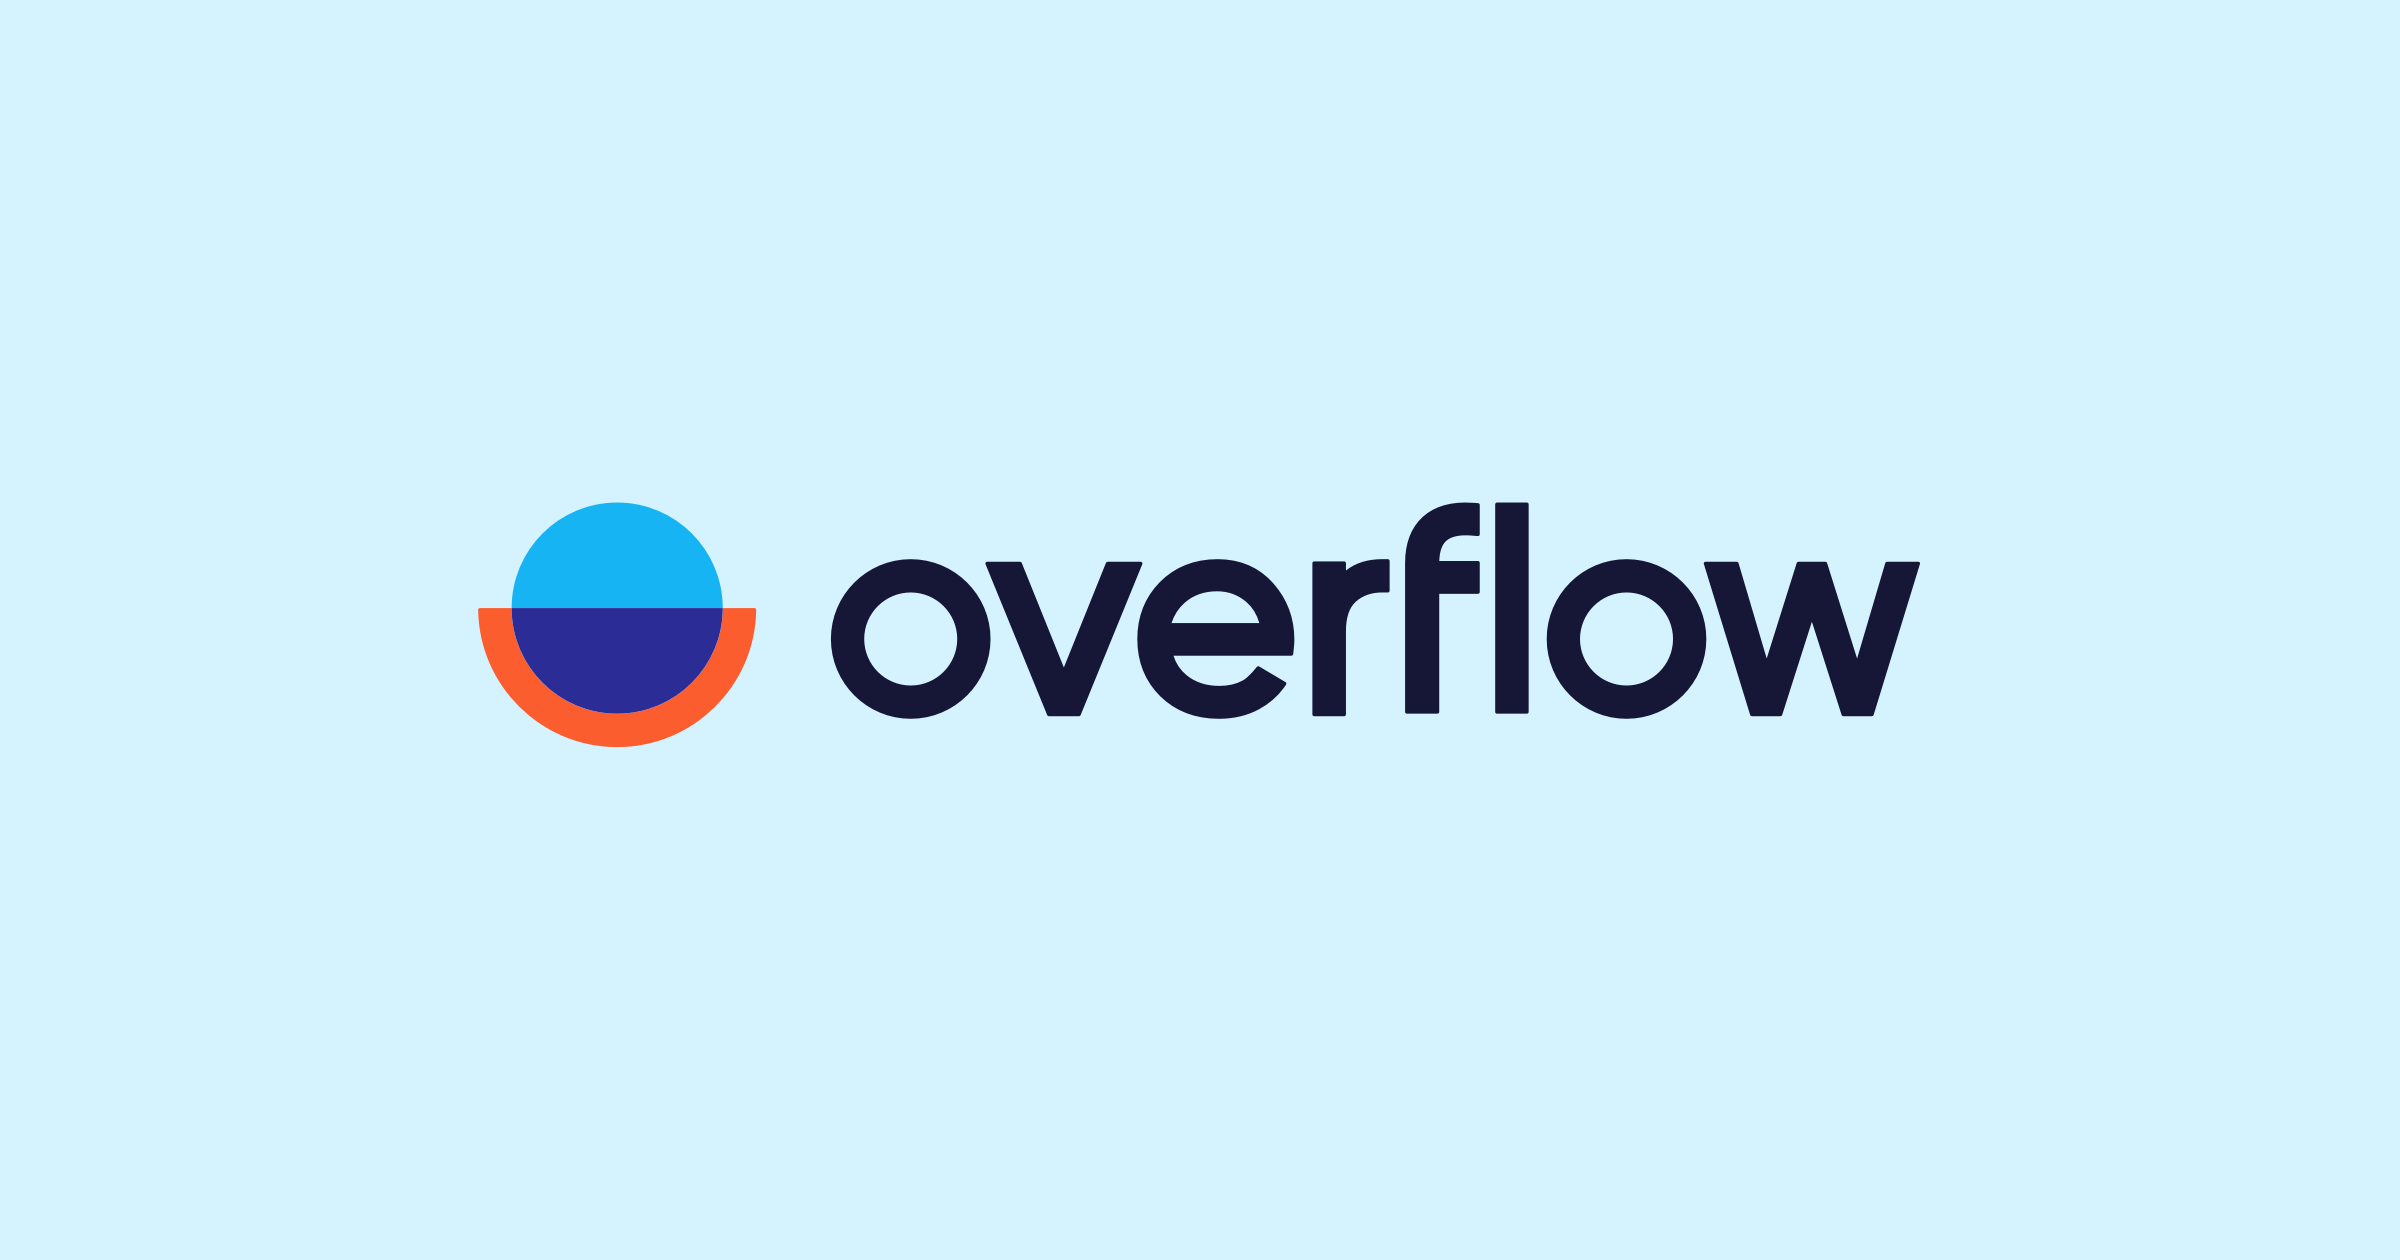 Overflow User Flows Done Right